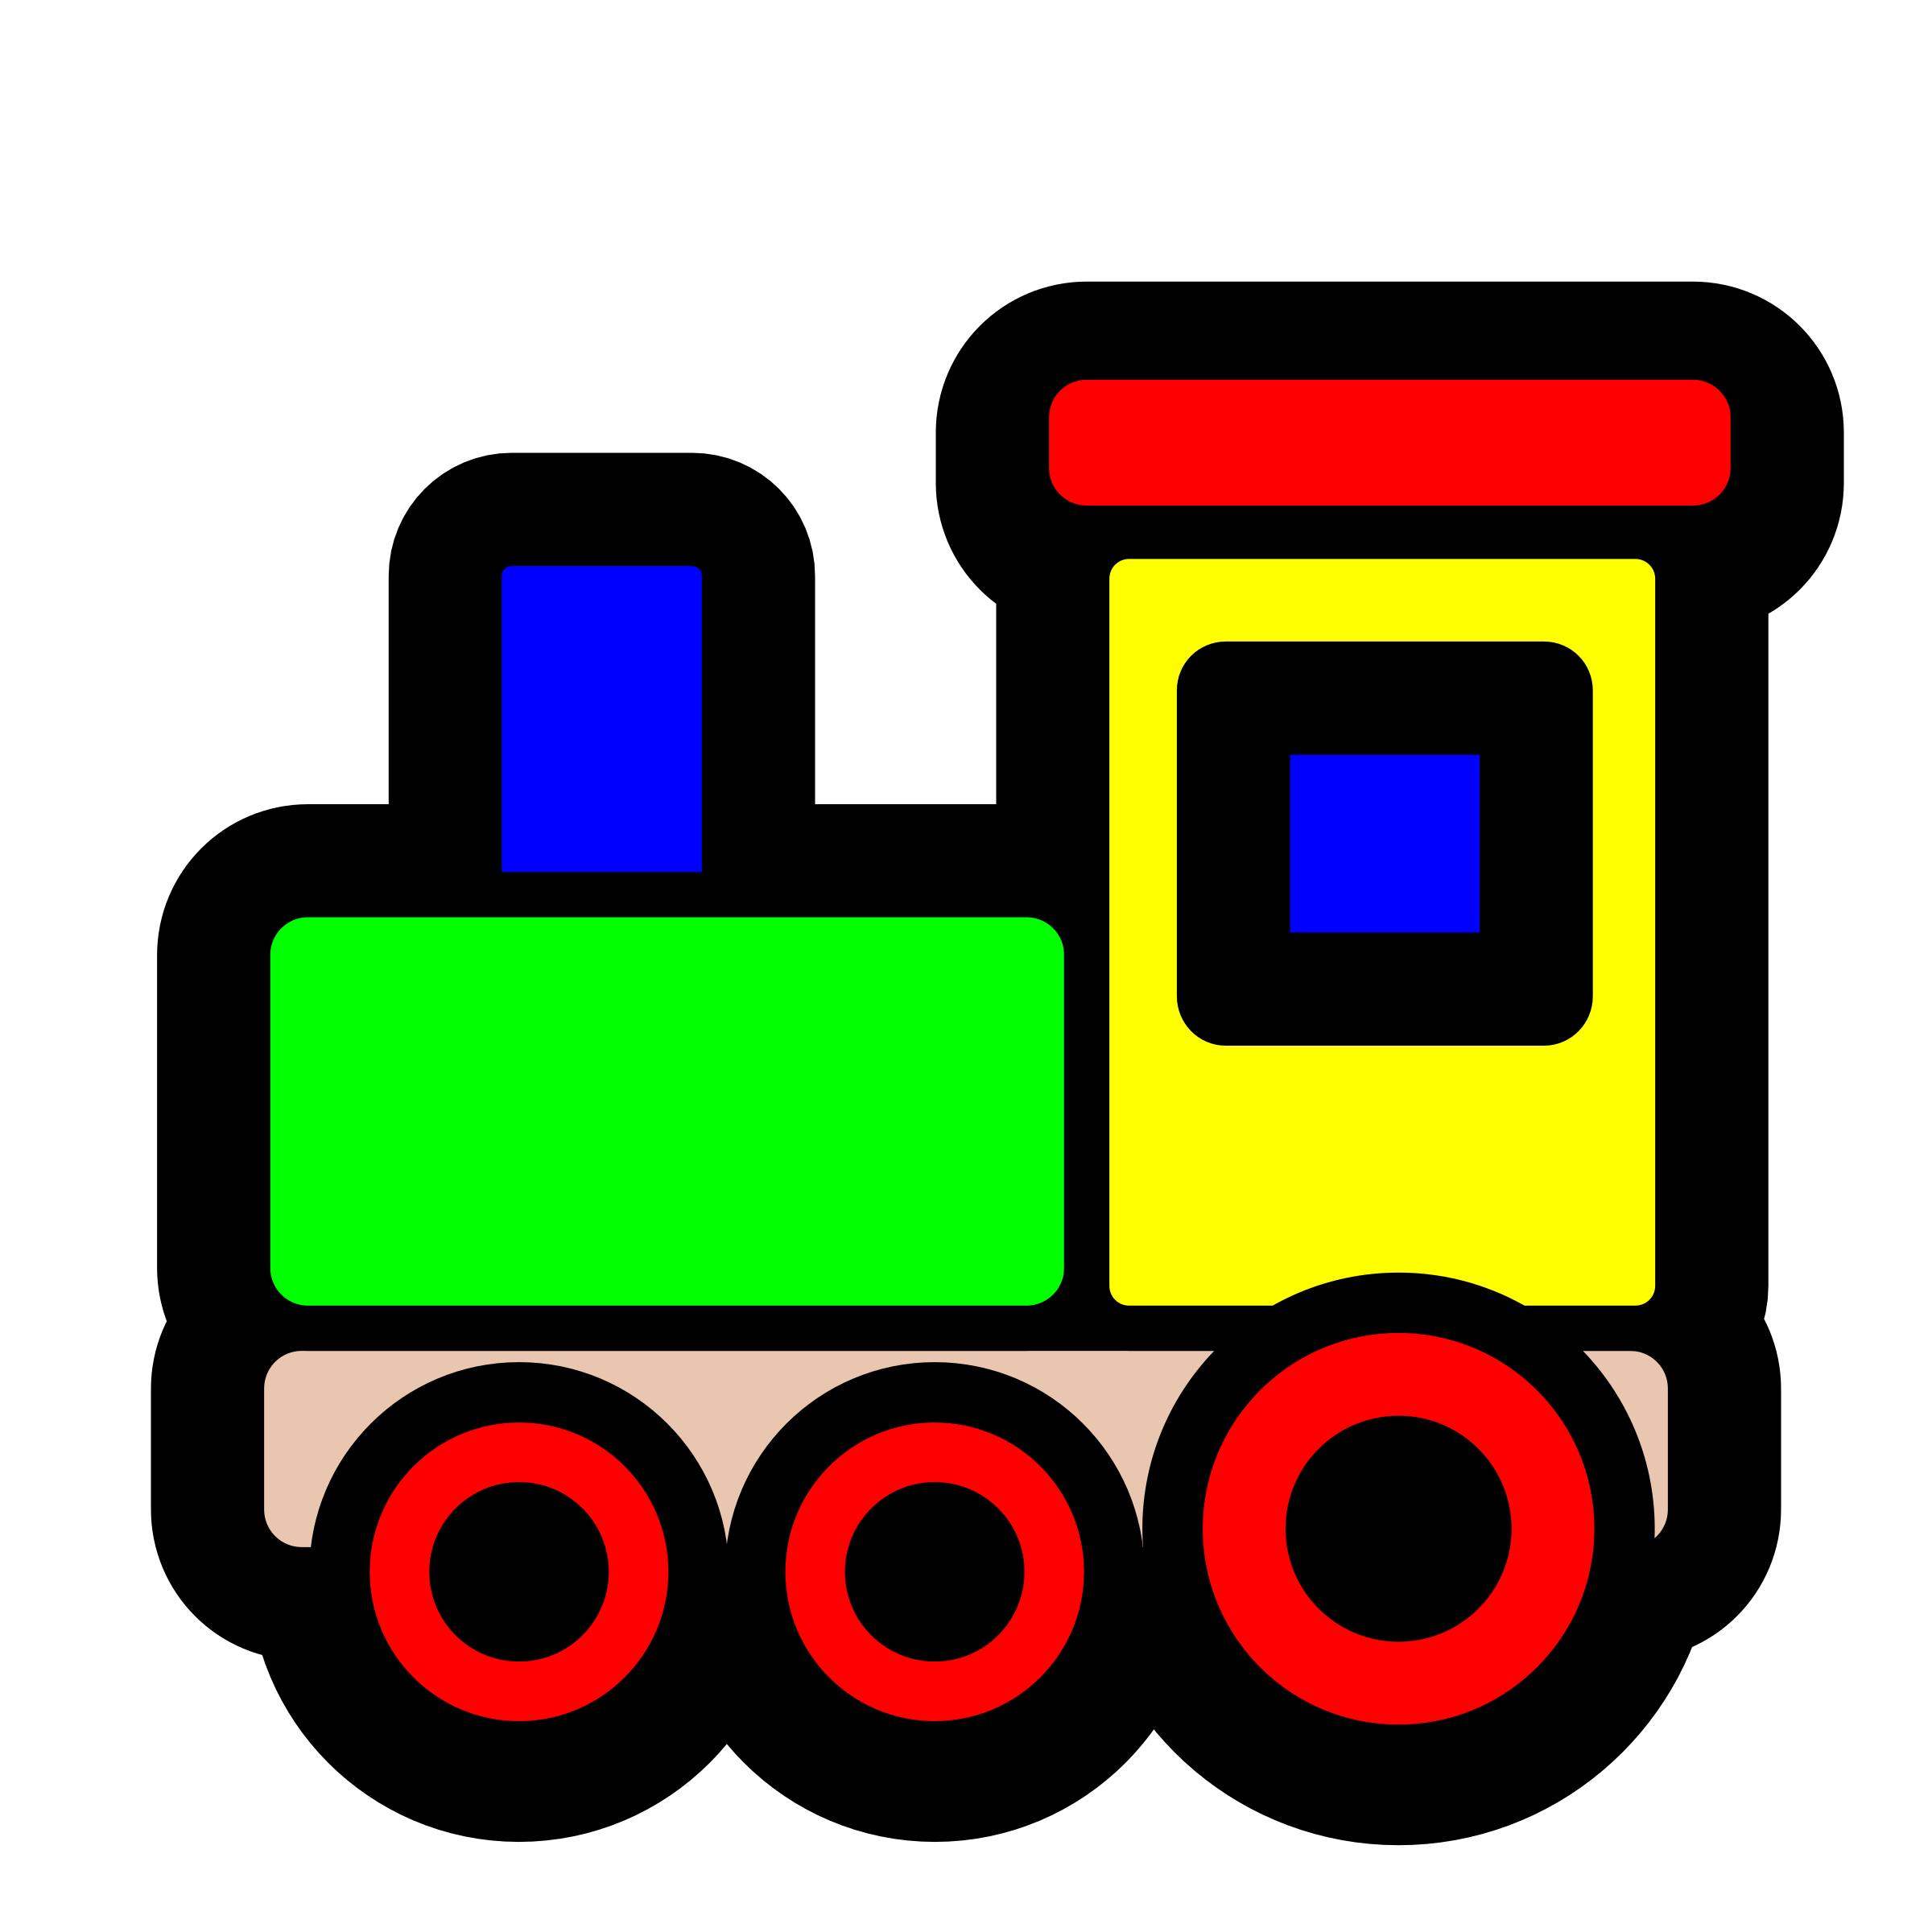 Toy Train Drawing at GetDrawings.com | Free for personal use Toy ...